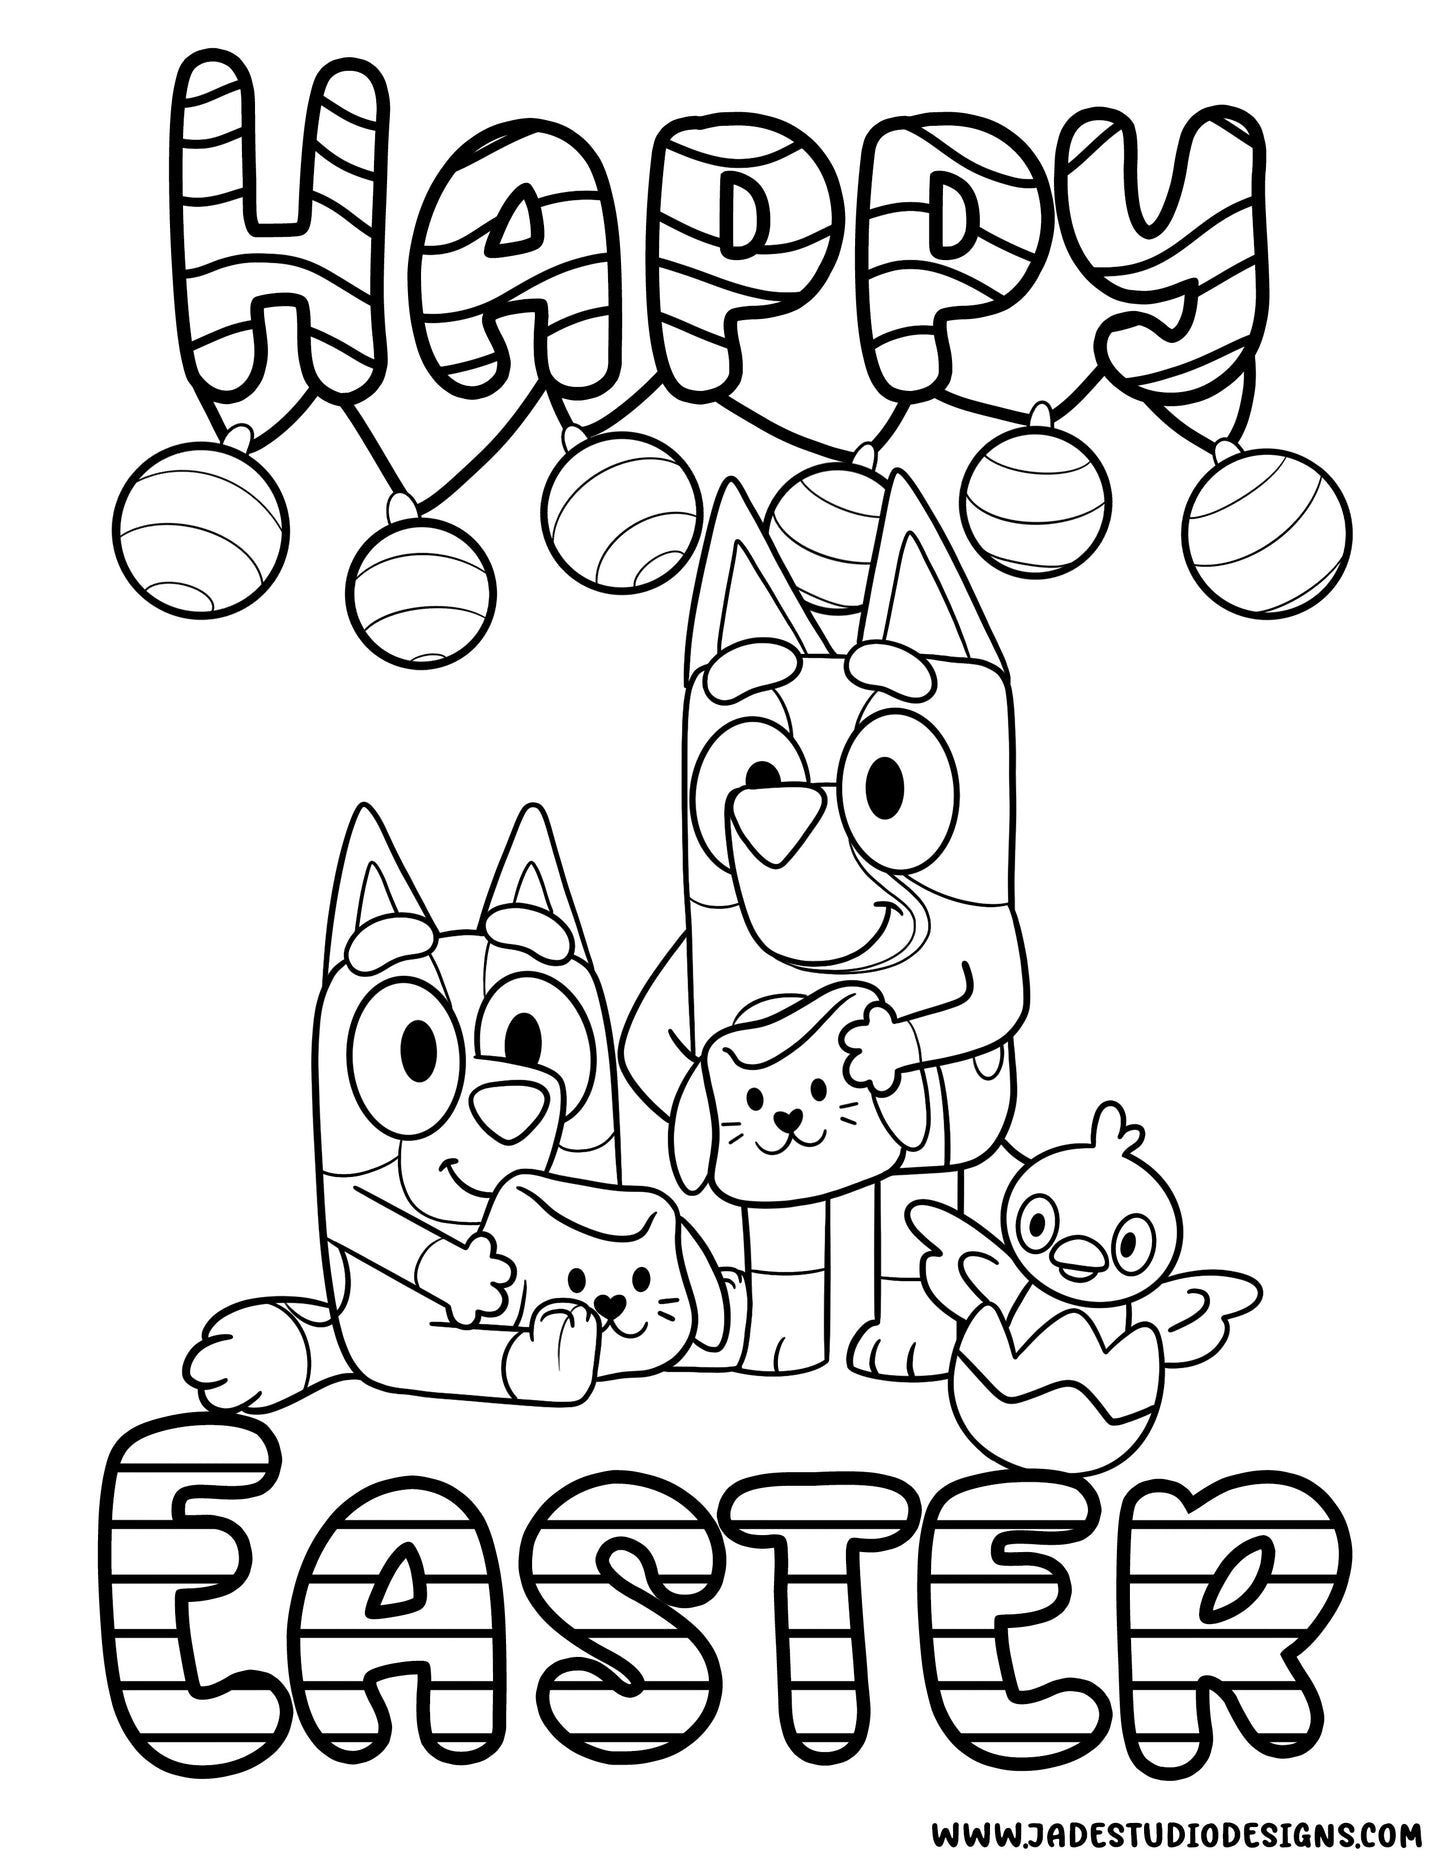 Free Blue Dog Easter Coloring Page